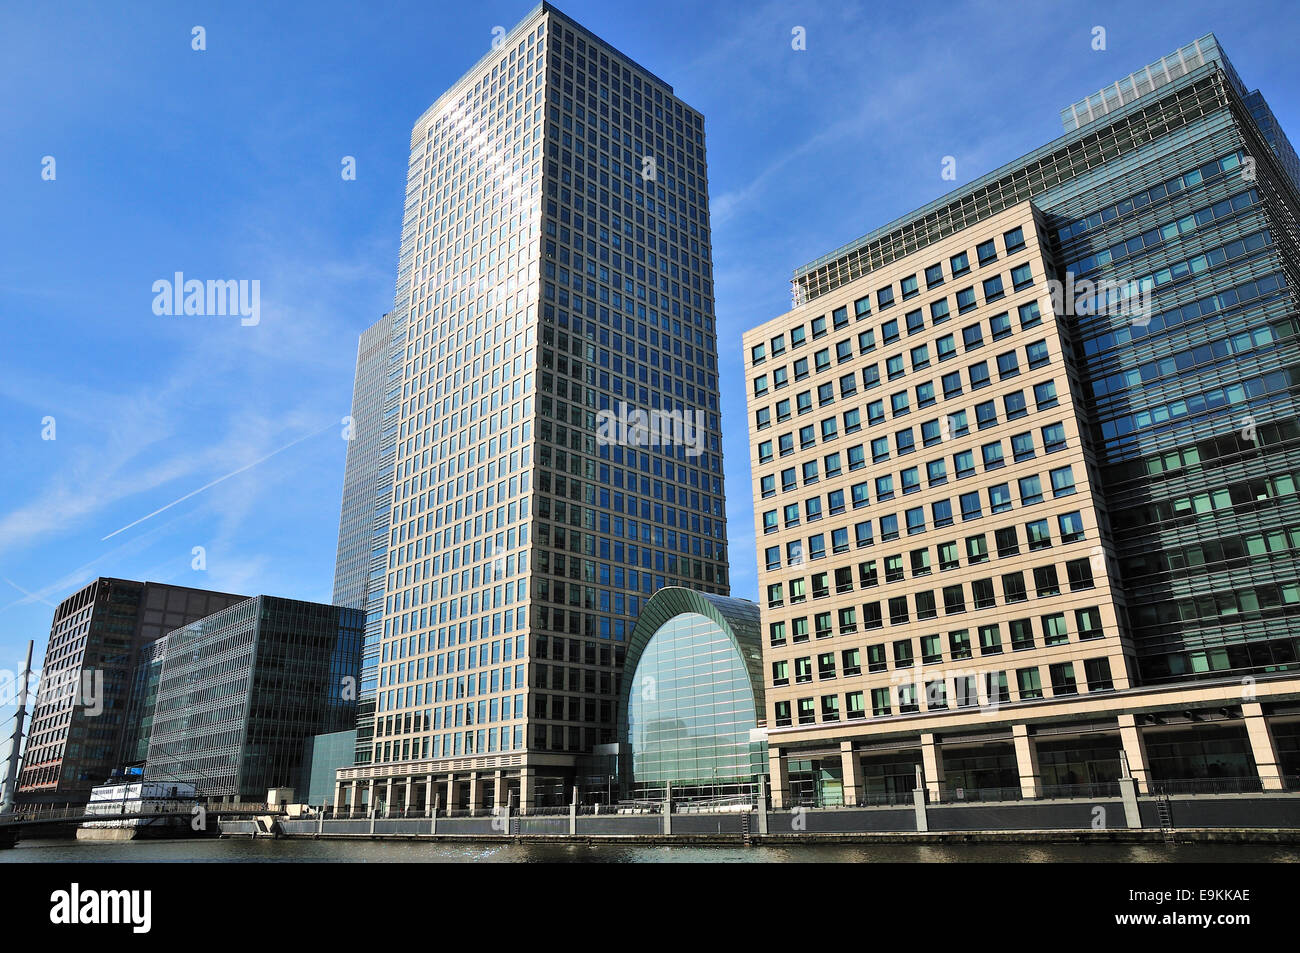 Buildings at Canary Wharf on the Isle of Dogs, London UK Stock Photo